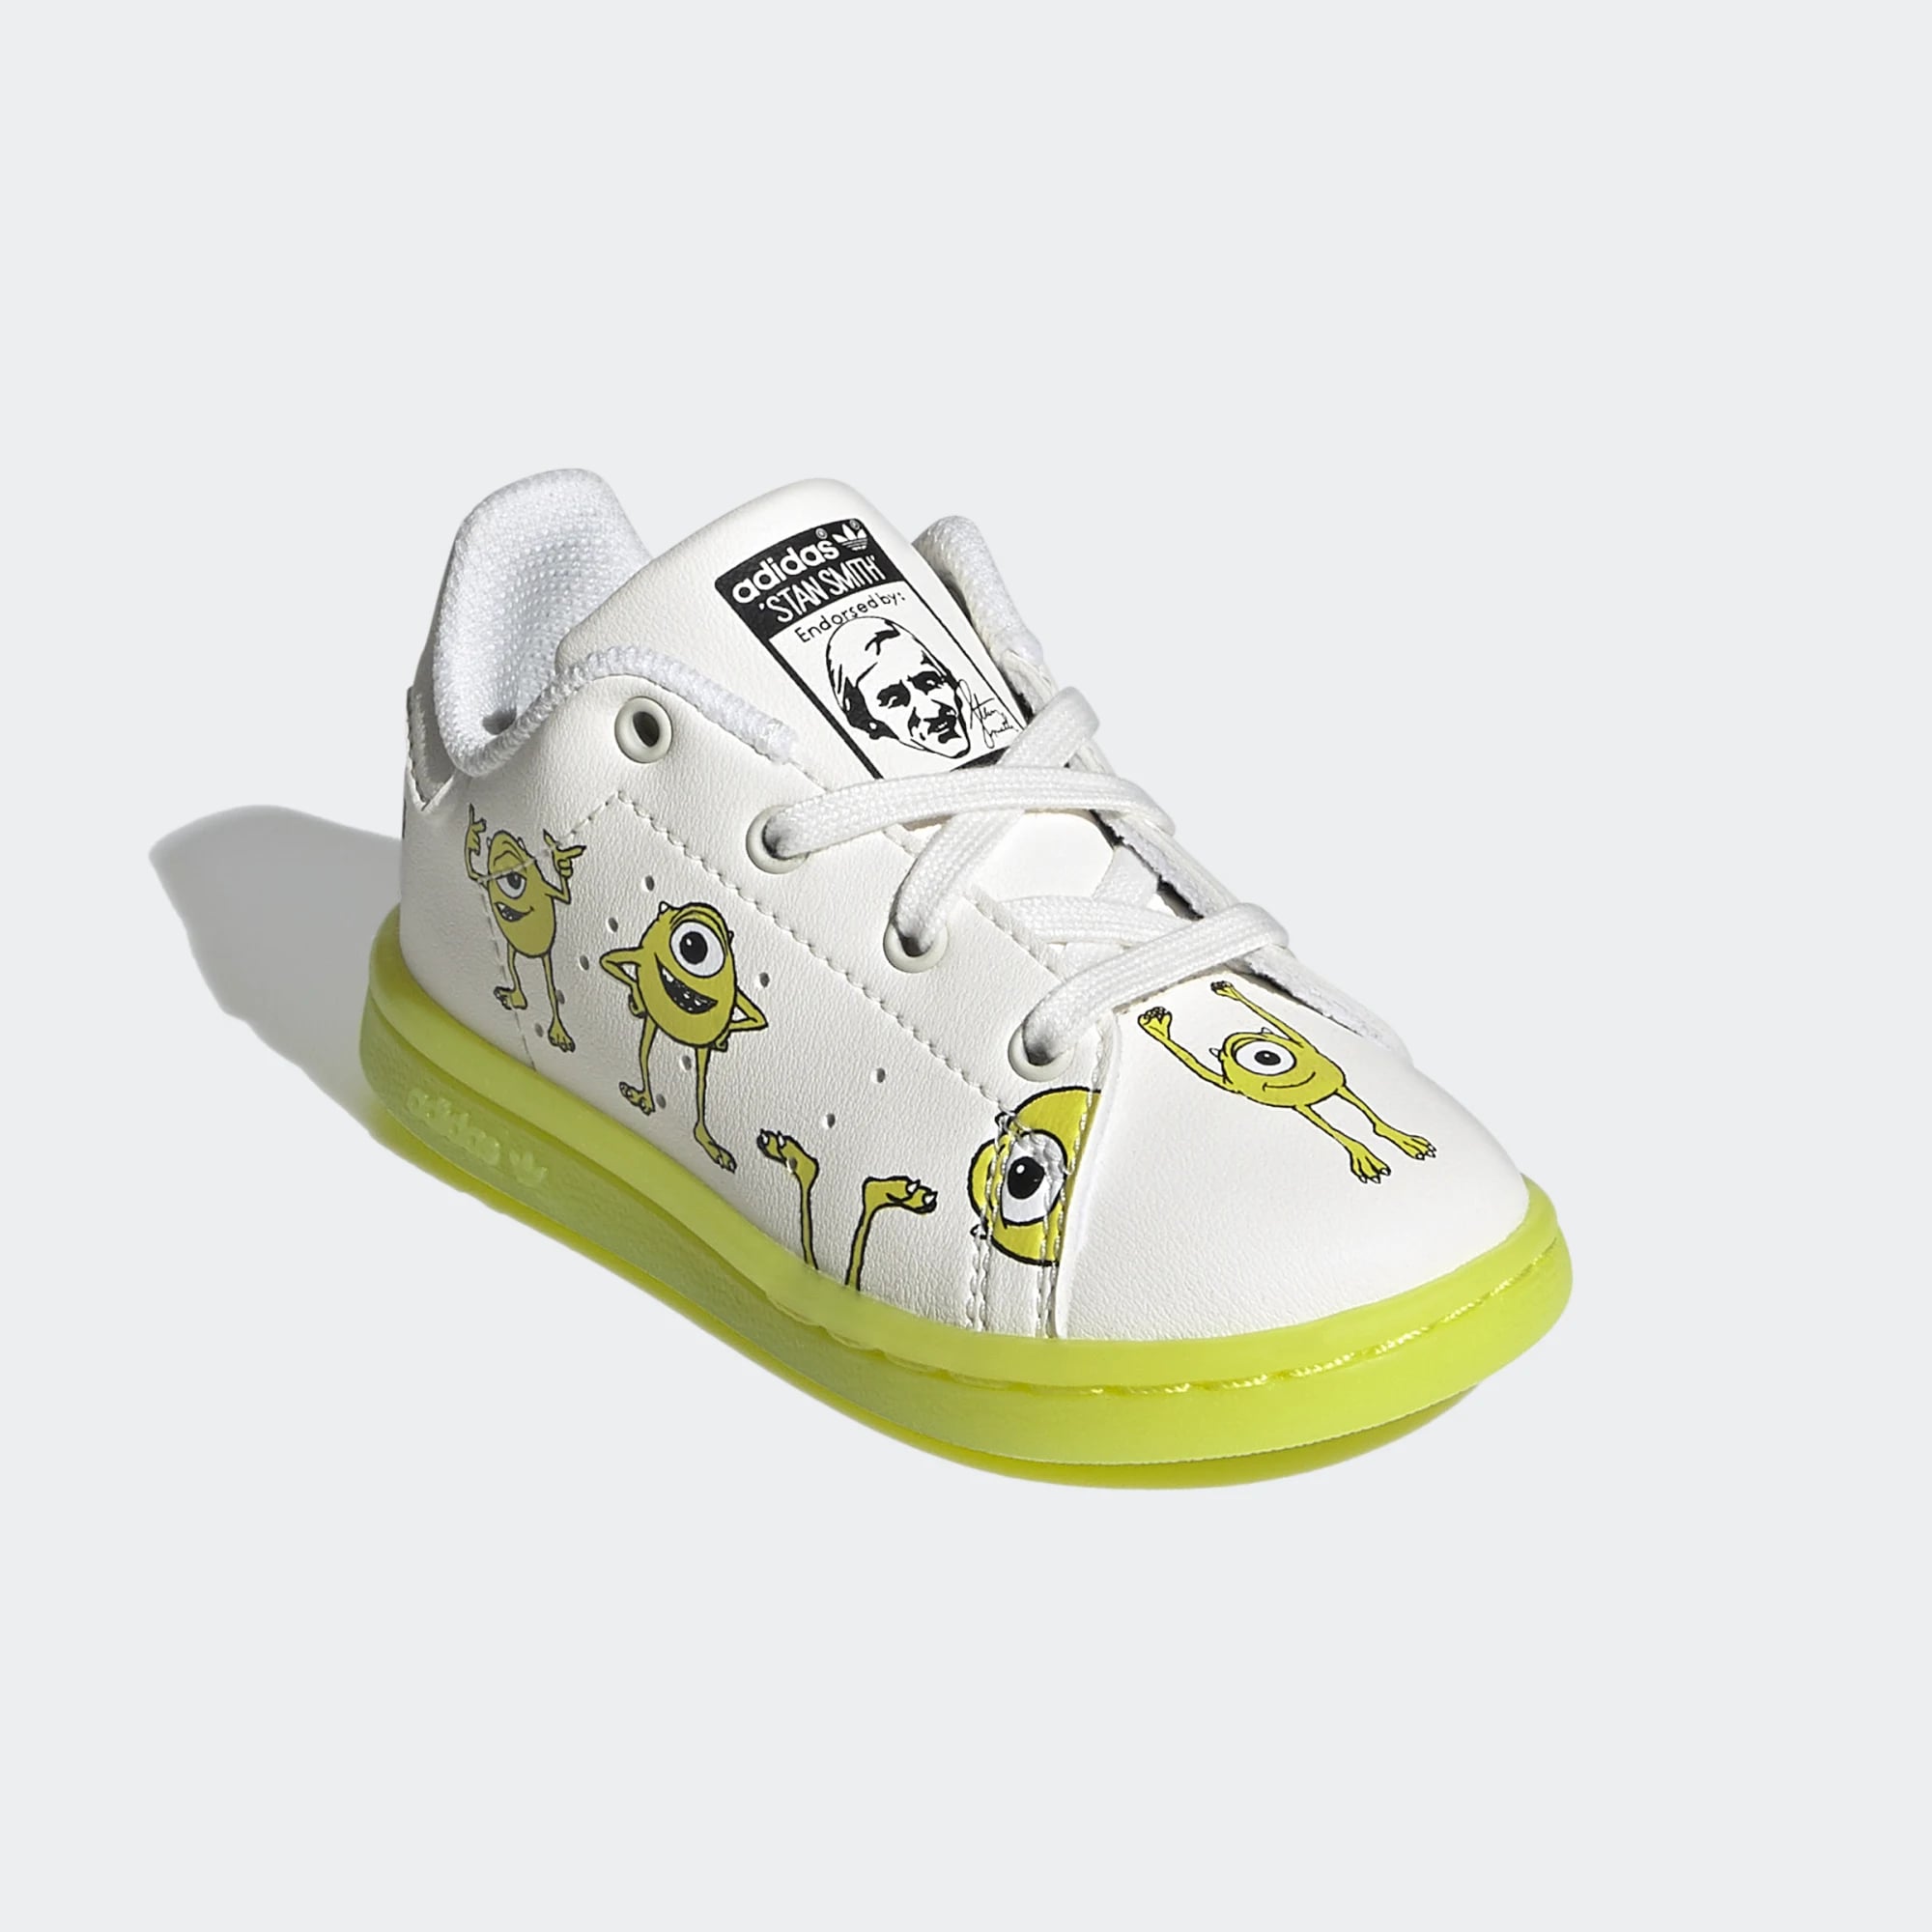 Bring the Character to Life with Adidas Mike Wazowski Shoes